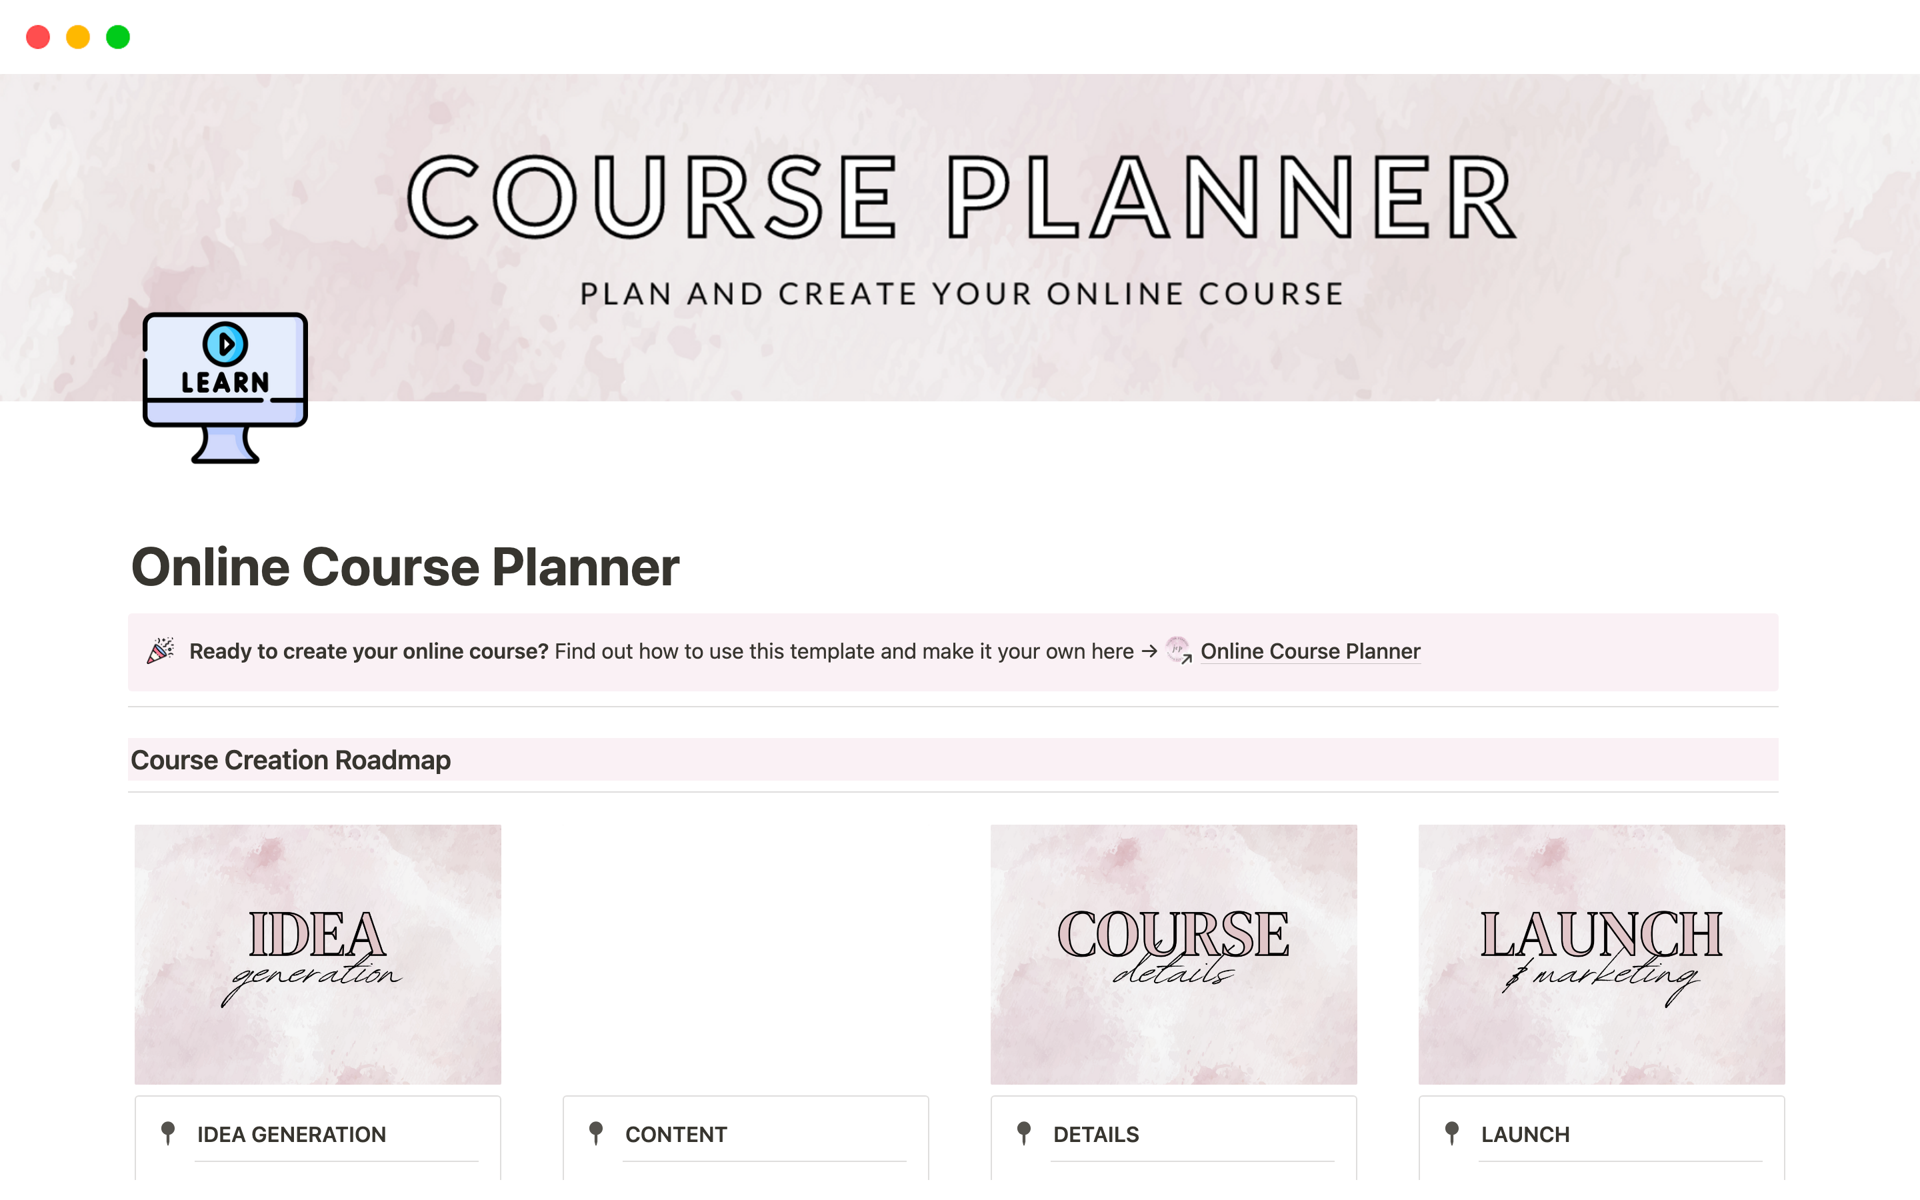 The Online Course Planner includes everything you need to plan, create, promote and launch your online course step-by-step.